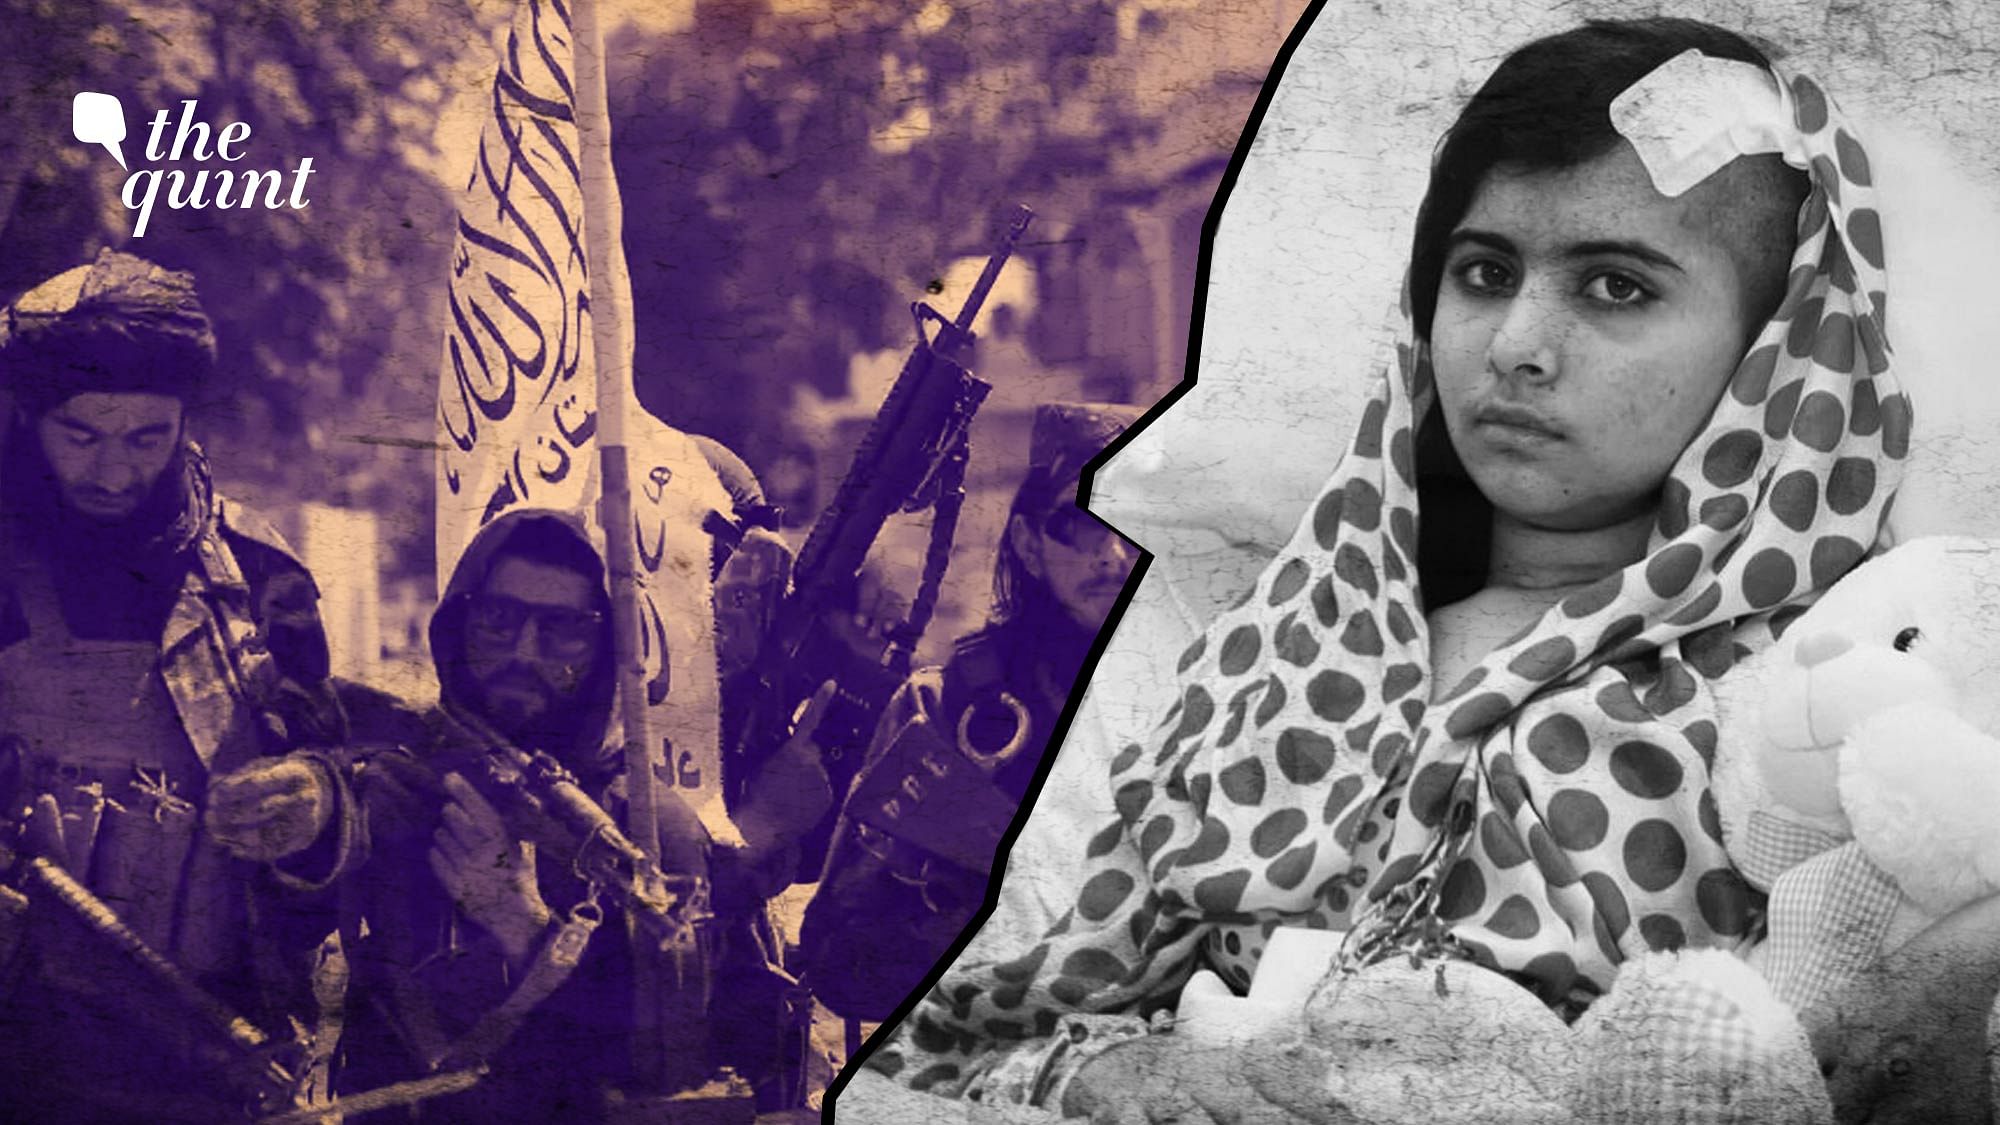 <div class="paragraphs"><p>Nobel Peace Prize awardee Malala Yousafzai, in an open letter published on Sunday, 17 October, appealed to the Taliban government in Afghanistan to permit the resumption of <a href="https://www.thequint.com/news/world/taliban-afghanistan-afghanistan-crisis-boys-schools-re-open-girls-education-no-mention-taliban-education-ministry#read-more">schools for girls in the country</a>.</p></div>